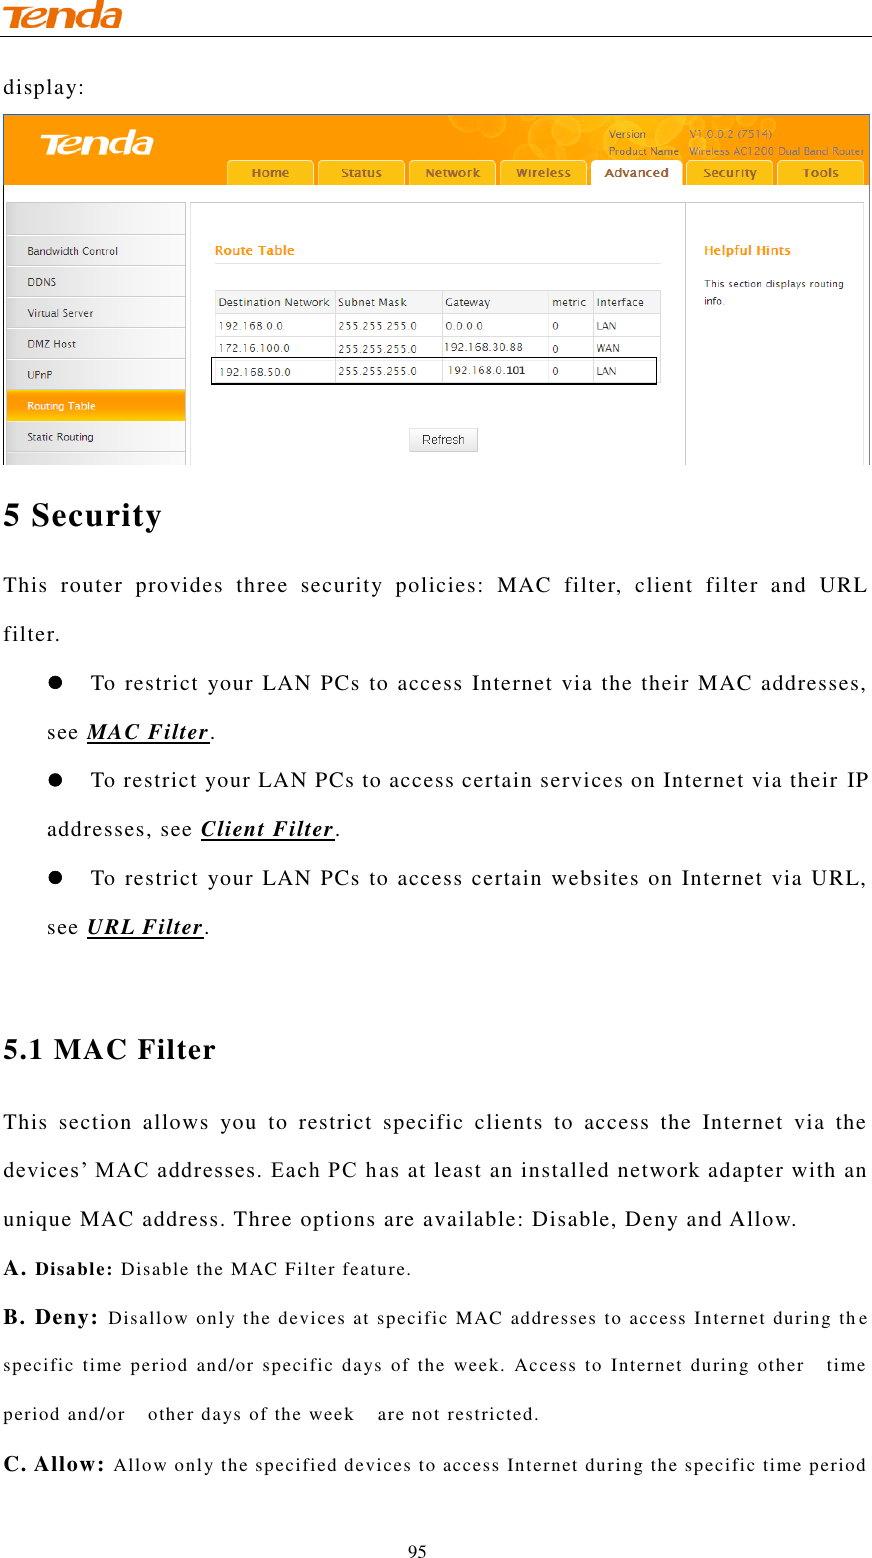                                    95 display:  5 Security This  router  provides  three  security  policies:  MAC  filter,  client  filter  and  URL filter.  To restrict your LAN PCs to access Internet via the their MAC addresses, see MAC Filter.  To restrict your LAN PCs to access certain services on Internet via their  IP addresses, see Client Filter.  To restrict your LAN PCs to access certain websites on Internet via URL, see URL Filter.  5.1 MAC Filter This  section  allows  you  to  restrict  specific  clients  to  access  the  Internet  via  the devices’ MAC addresses. Each PC h as at least an installed network adapter with an unique MAC address. Three options are available: Disable, Deny and Allow.  A. Disable: Disable the MAC Filter feature. B. Deny:  Disallow only the devices at specific MAC addresses to access Internet during th e specific  time  period  and/or  specific  days  of  the  week.  Access  to  Internet  during  other    time period and/or    other days of the week    are not restricted.  C. Allow: Allow only the specified devices to access Internet during the specific time period 